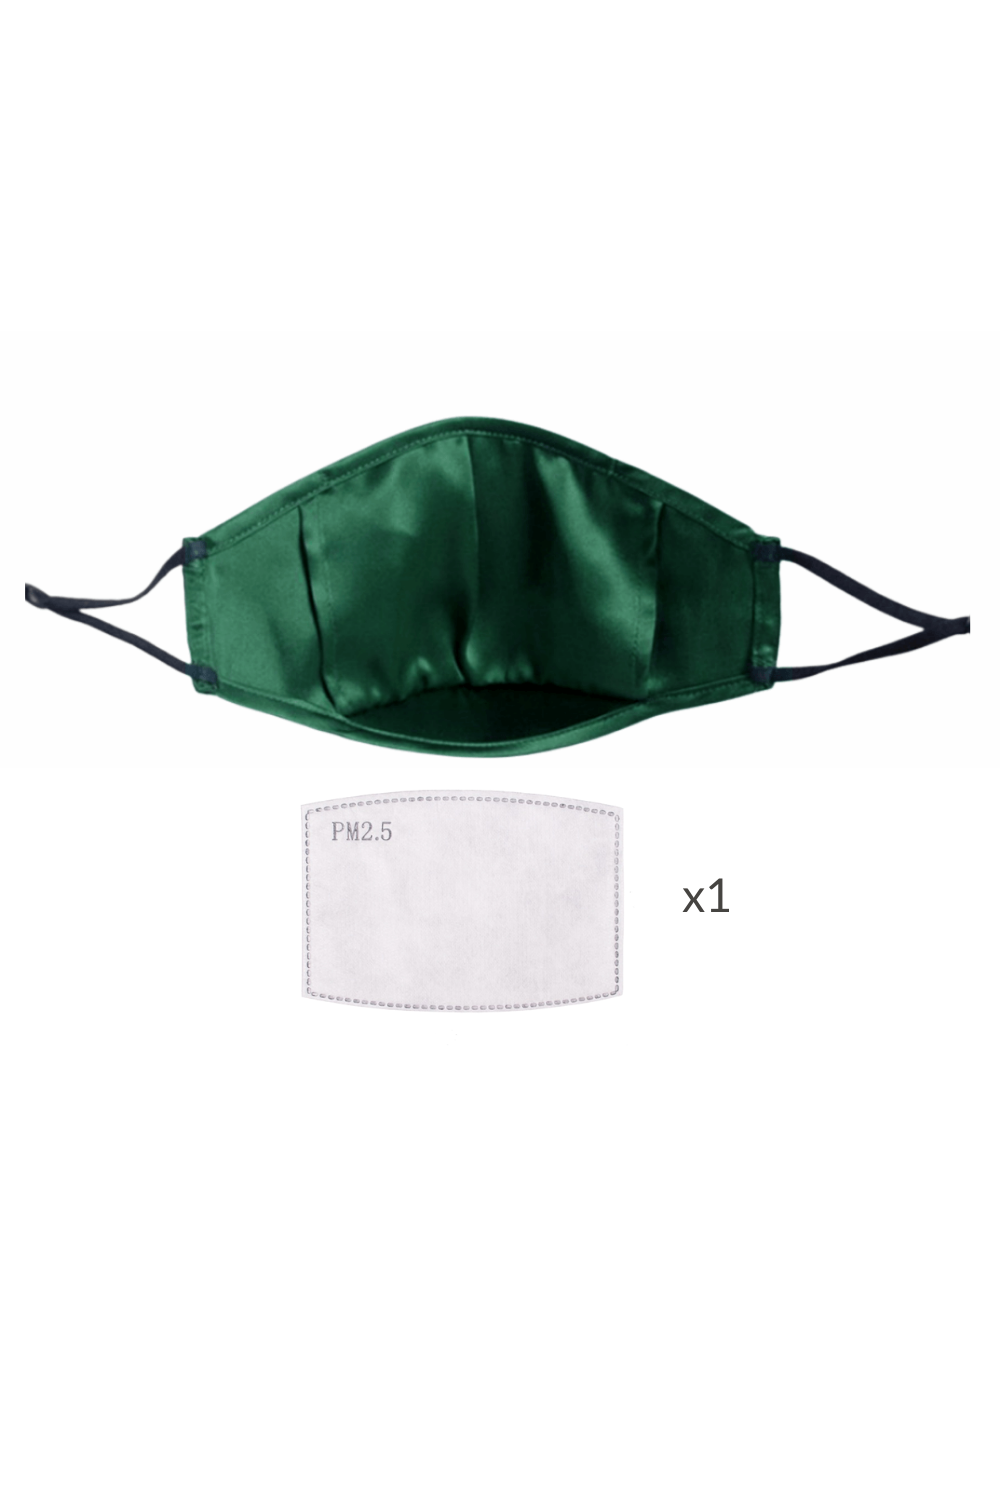 ULTRA Silk Face Mask - Emerald (with Filter Pocket and Nose Wire) - BASK ™